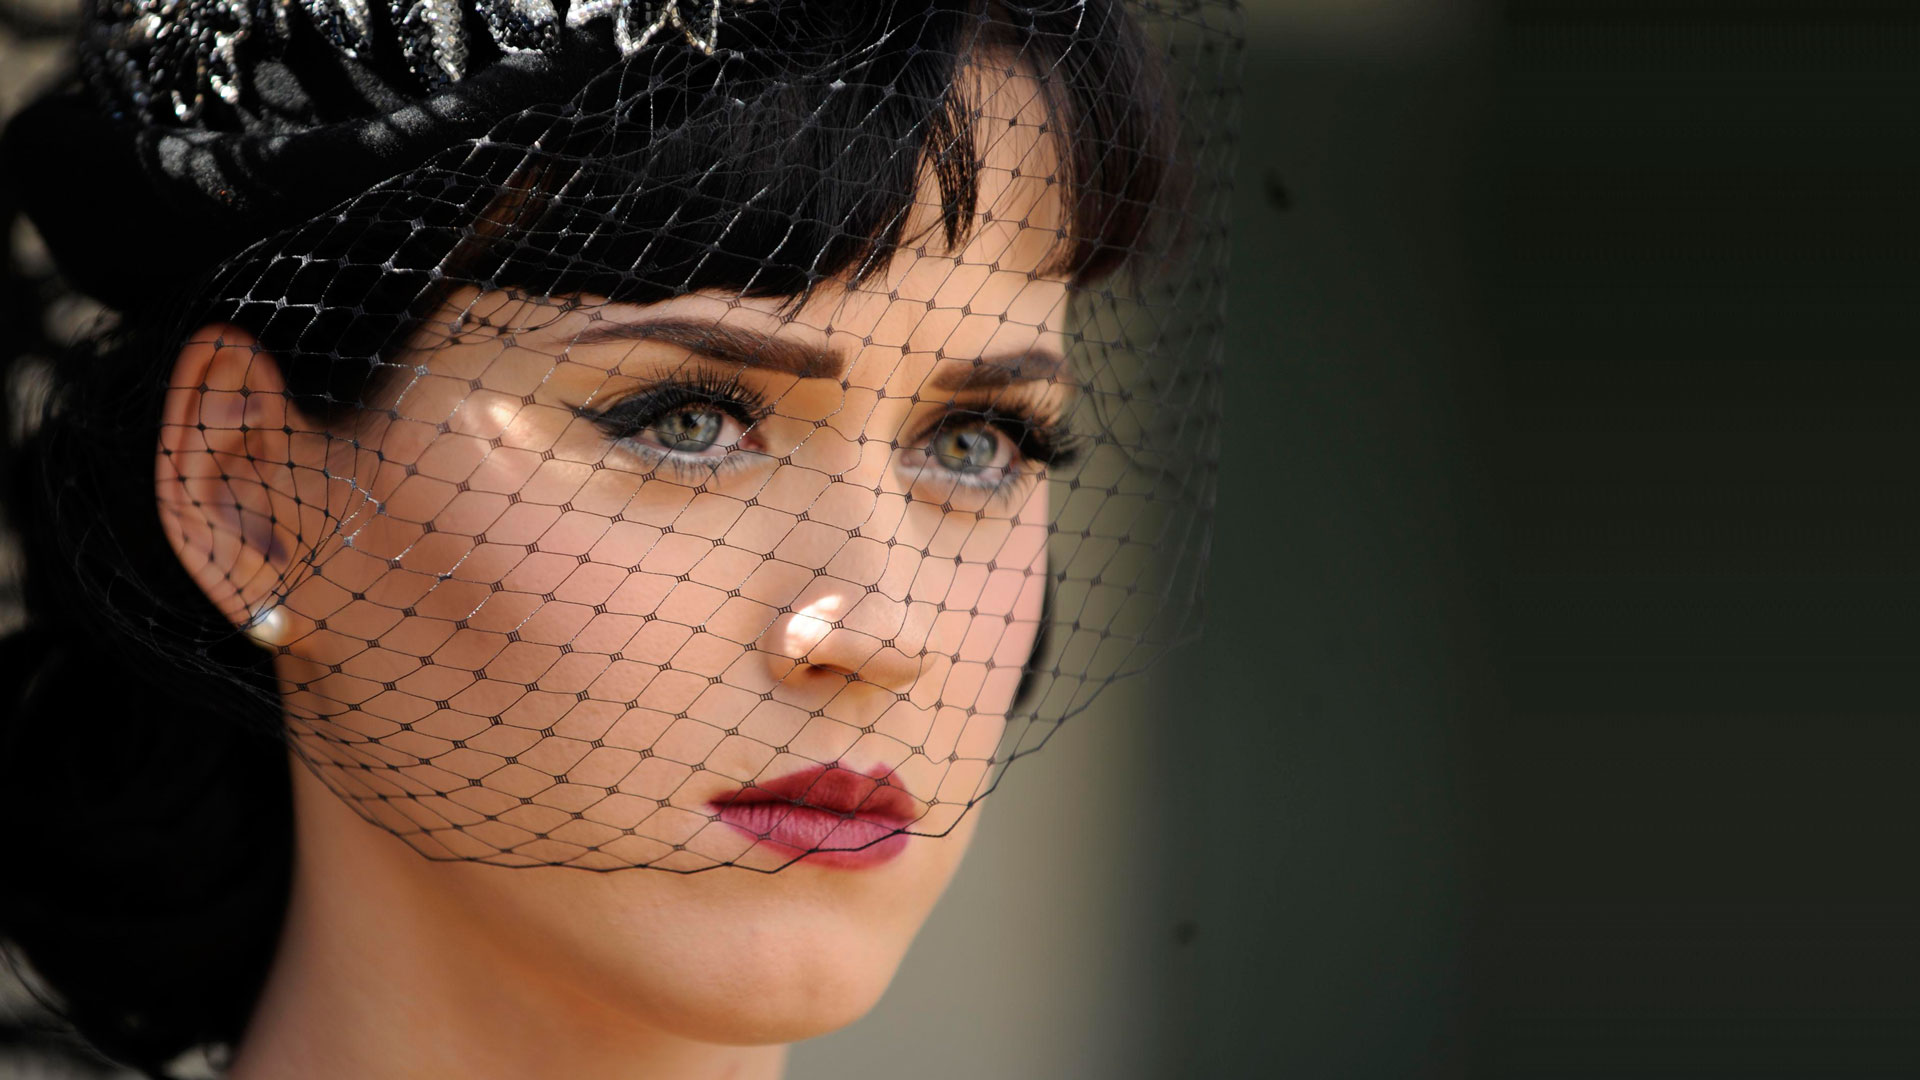 Music Katy Perry 1920x1080